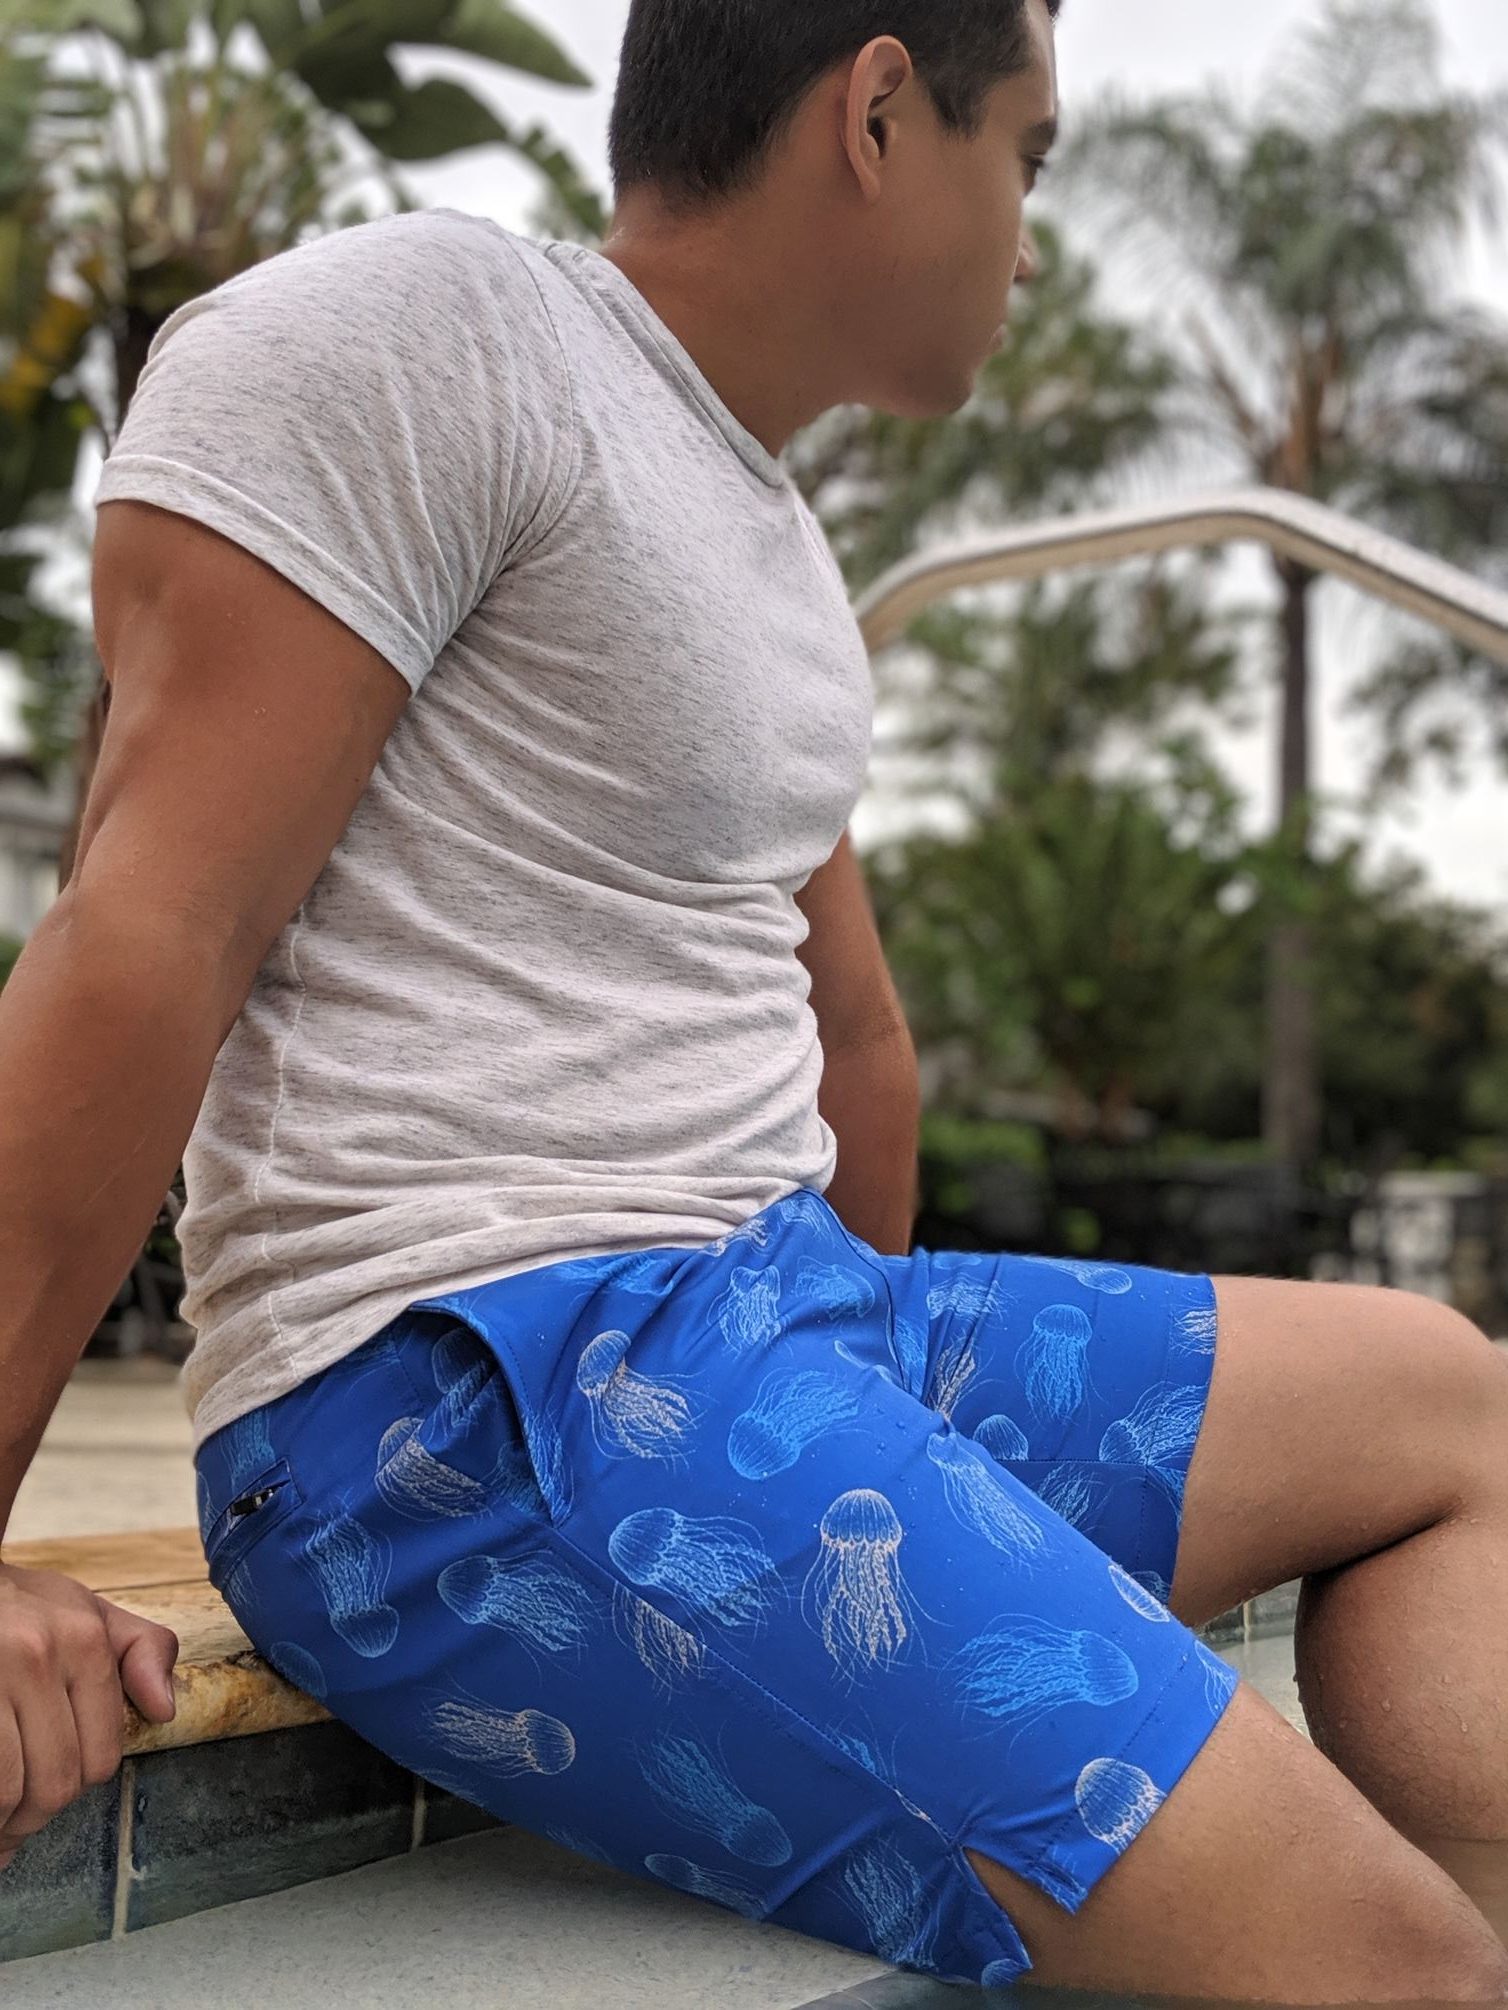 Hands-On Bearbottom Clothing Review (Shorts and T-Shirts)